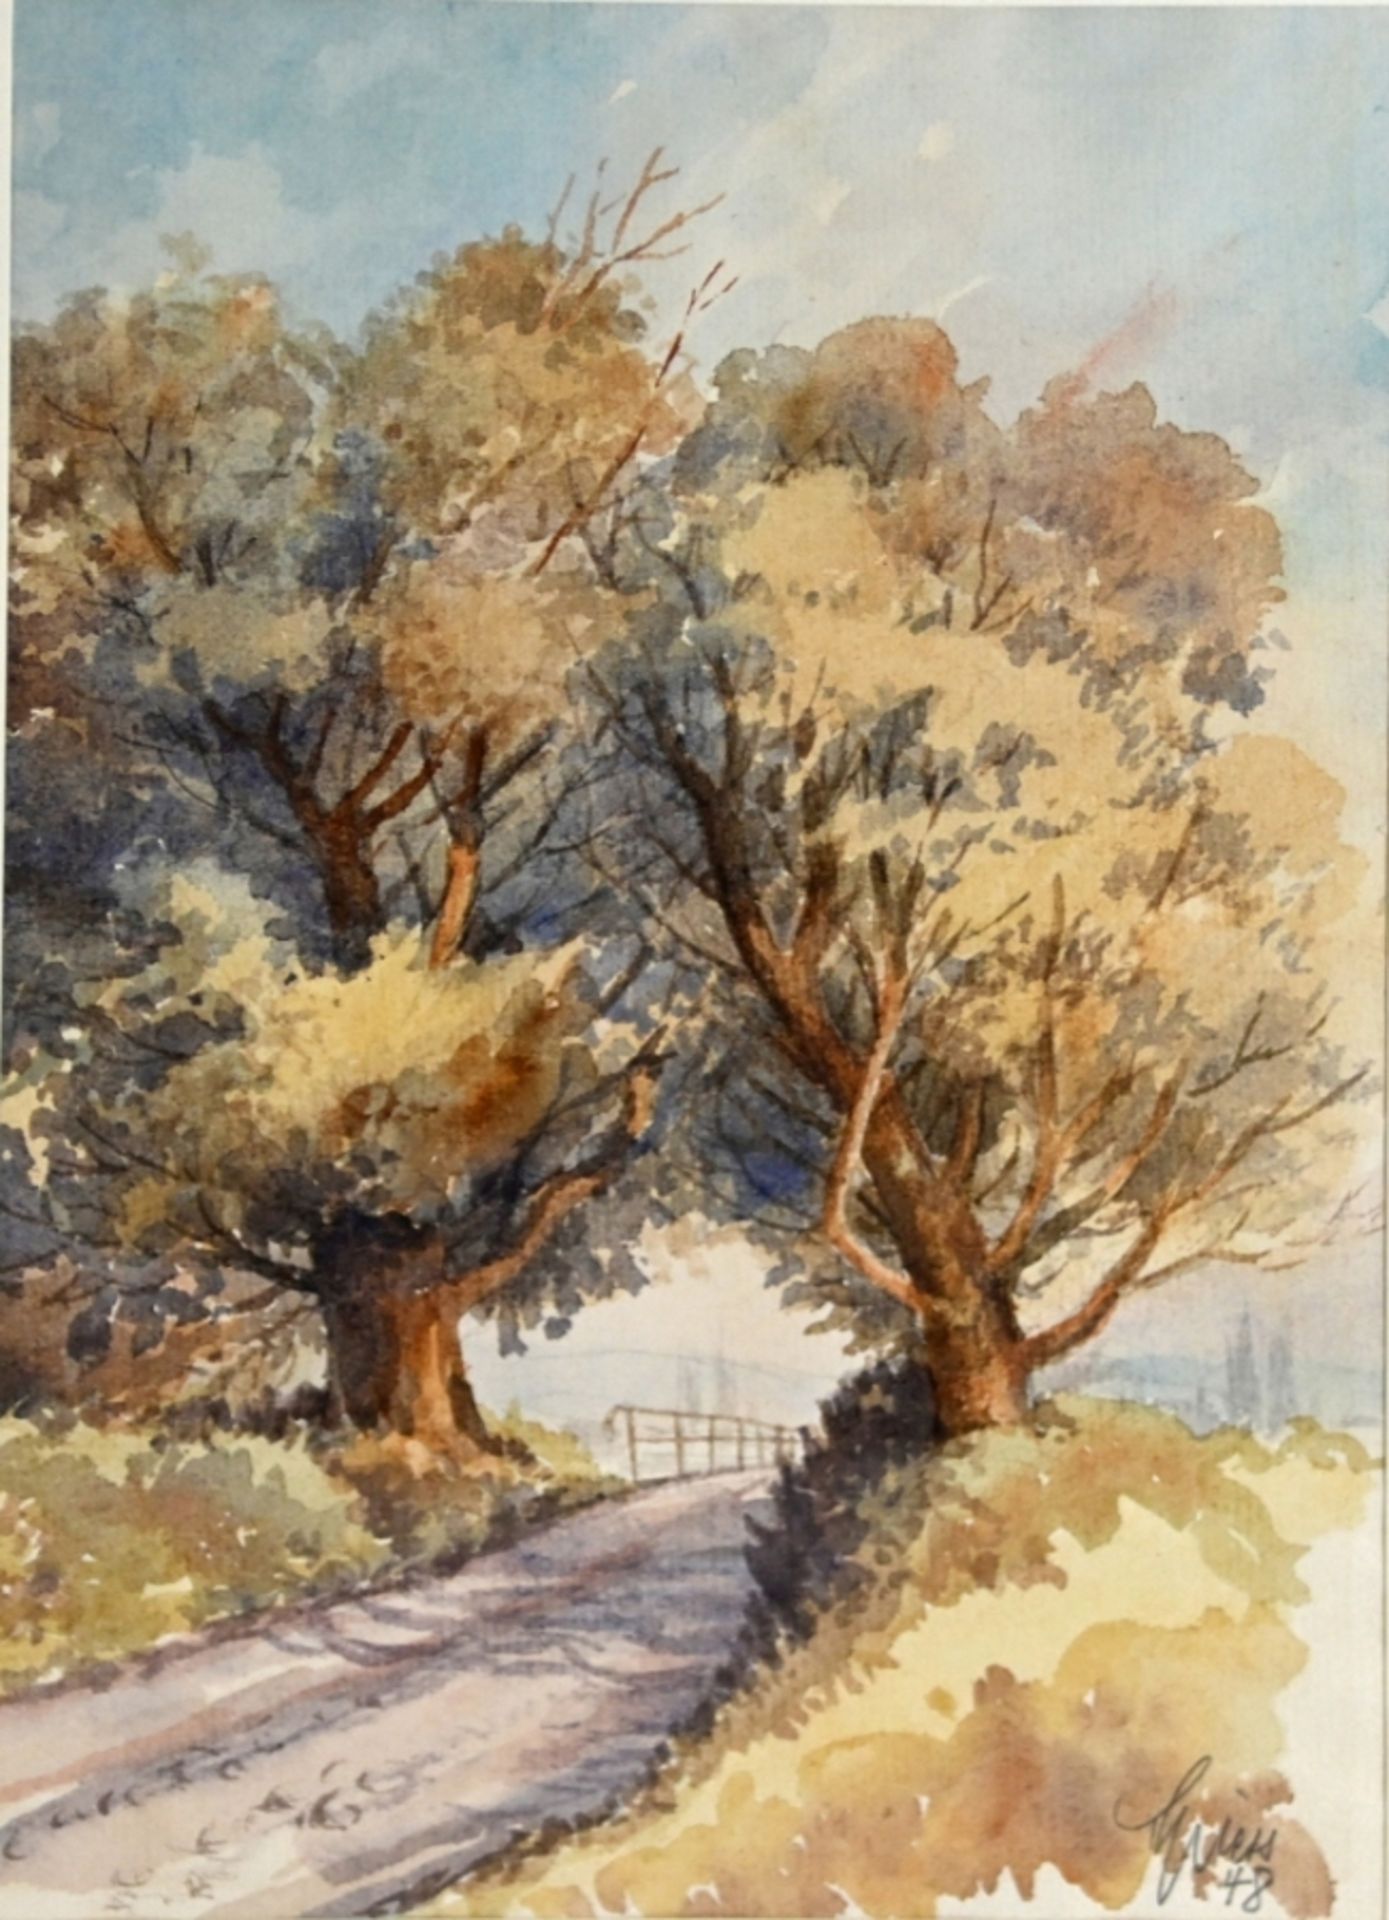 Spiess, Adolf (20th century)(20th century) Walk along the lakeshore, 1948, watercolour on paper.